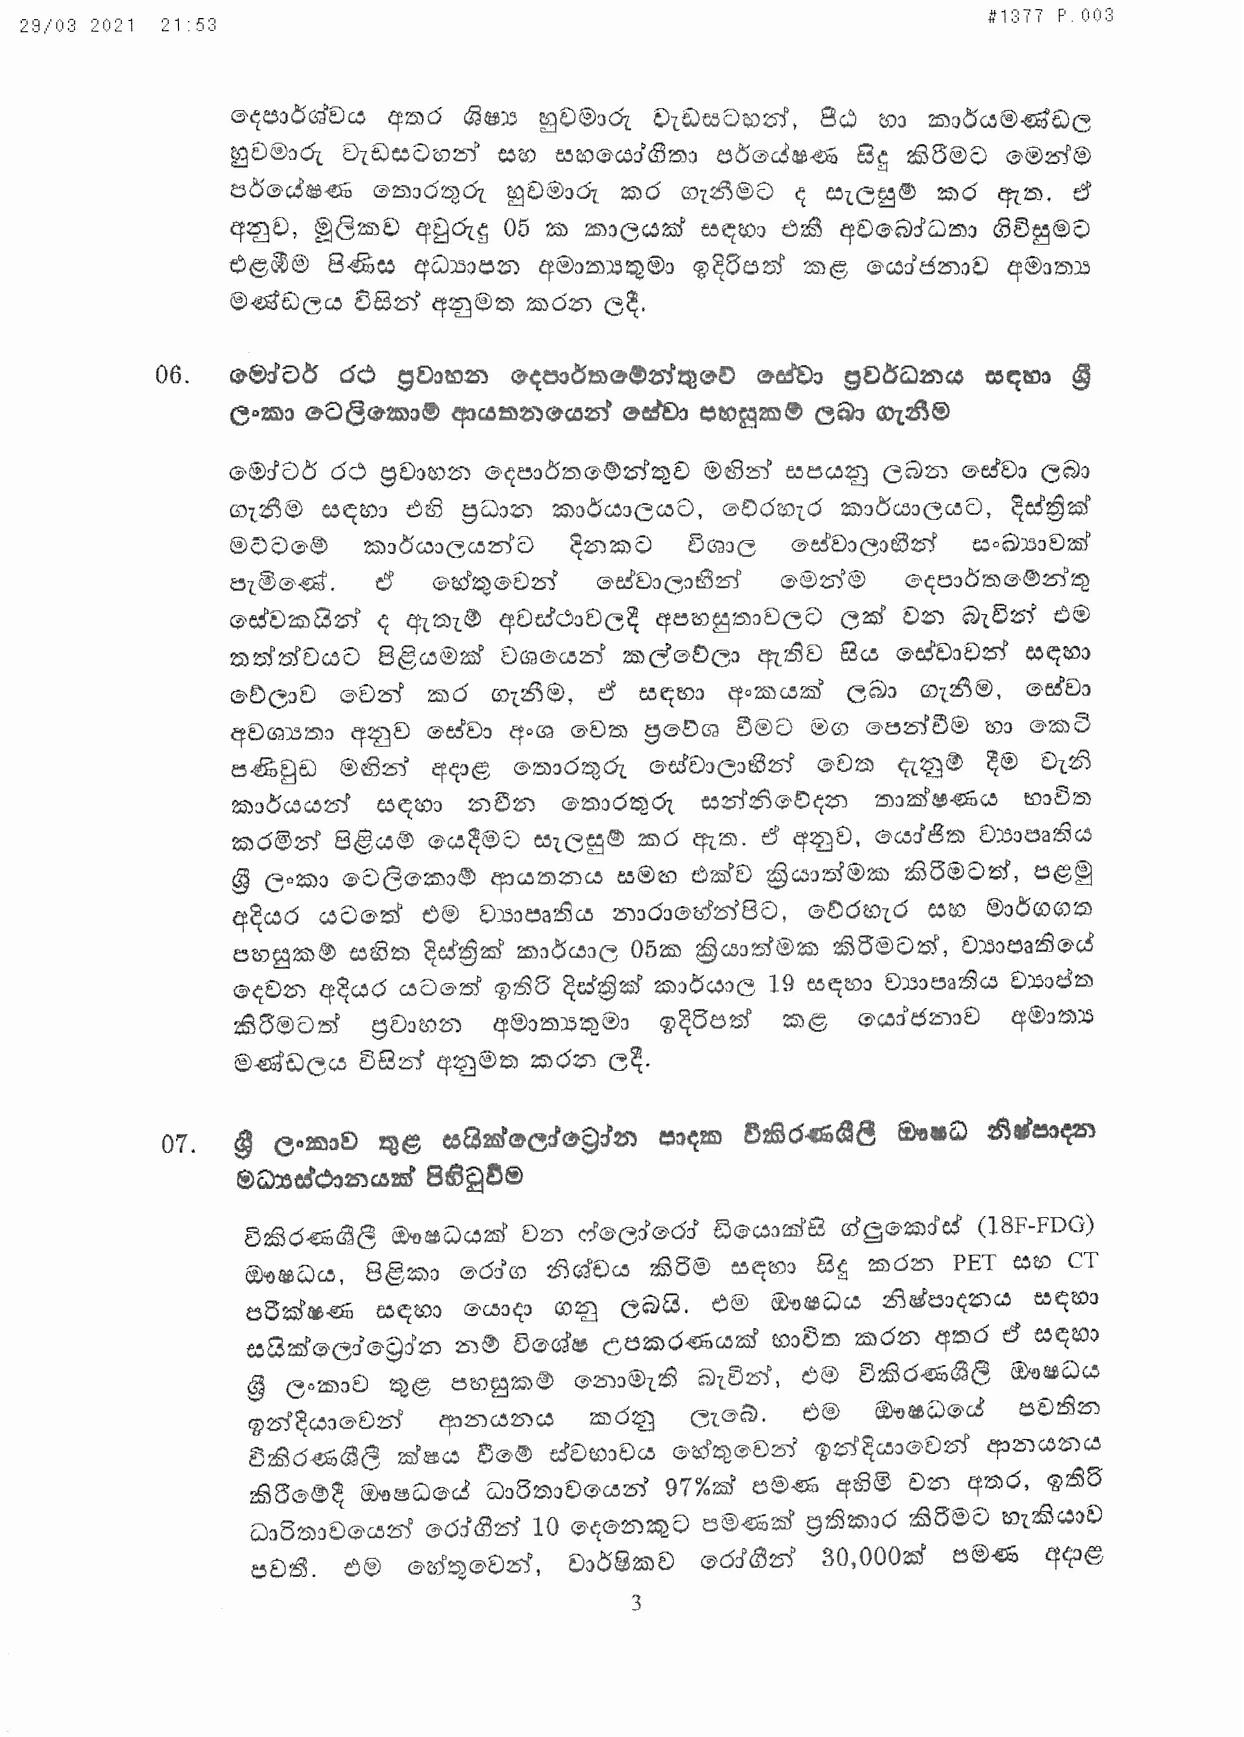 Cabinet Decision on 29.03.2021 1 page 003